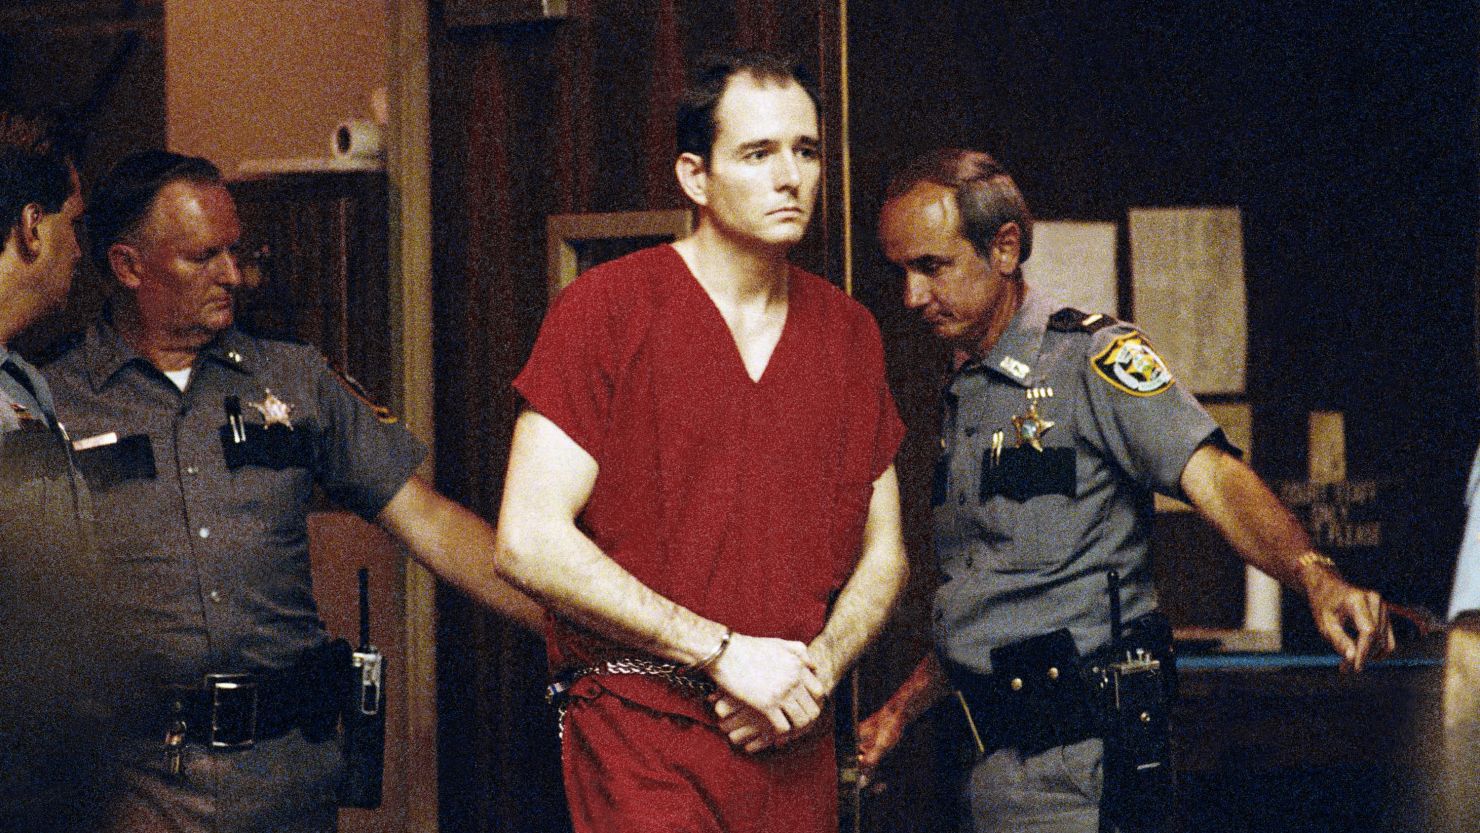 Danny Rolling was executed in 2006 after he confessed to killing five students in Gainesville, Florida.